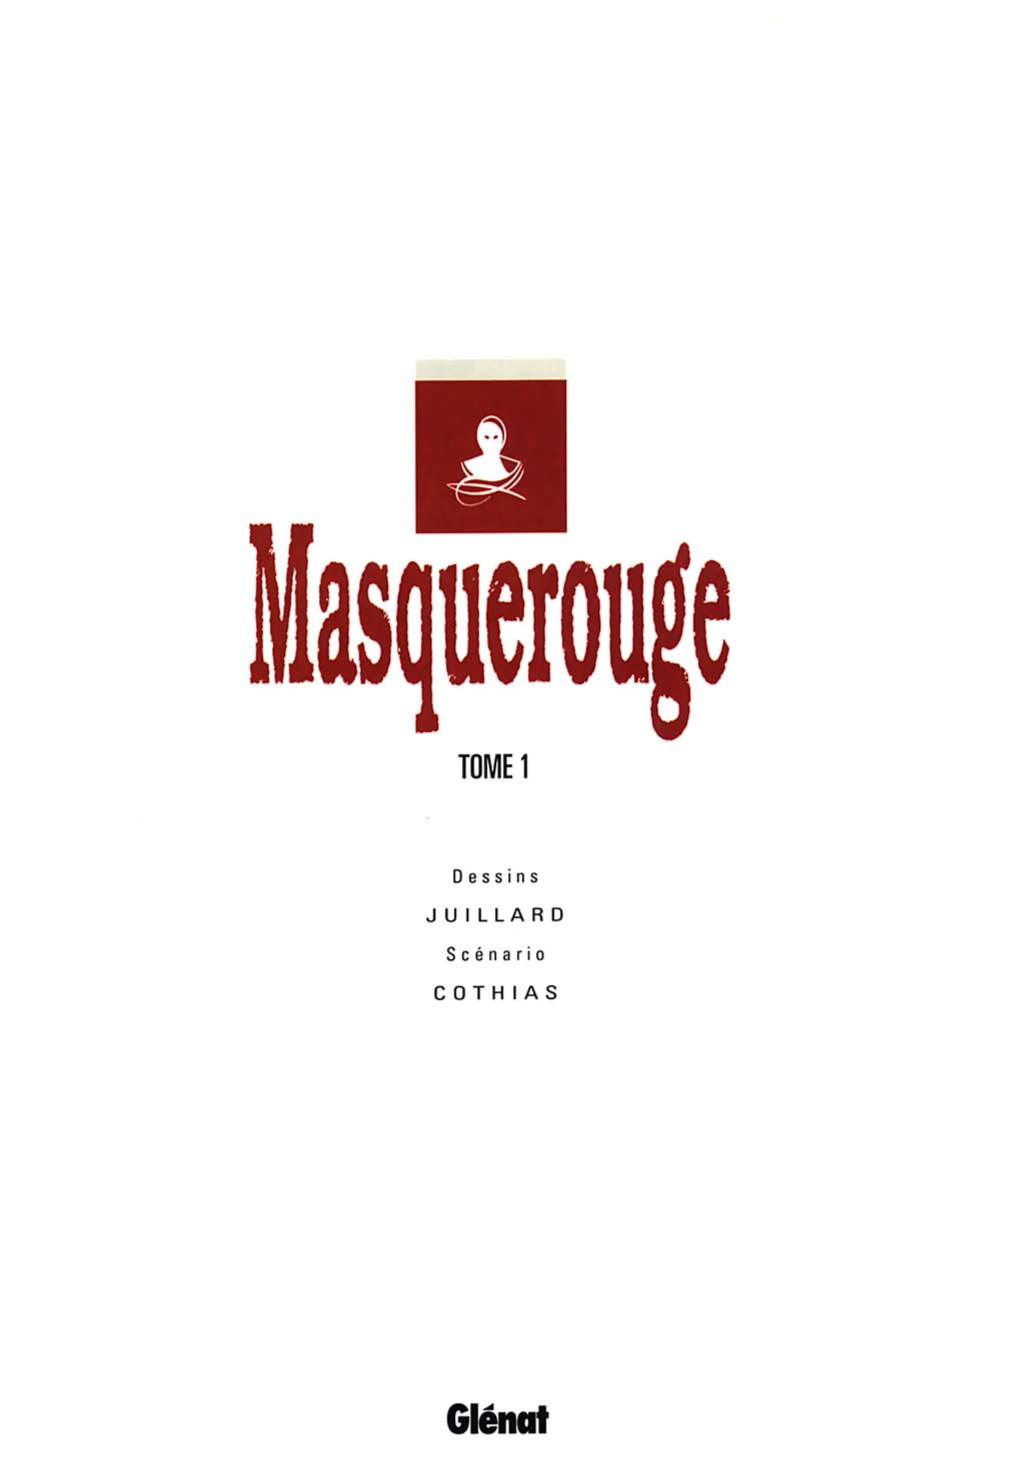 Masque rouge - Collection bdfr - 12 Albums : sid : Free Download 